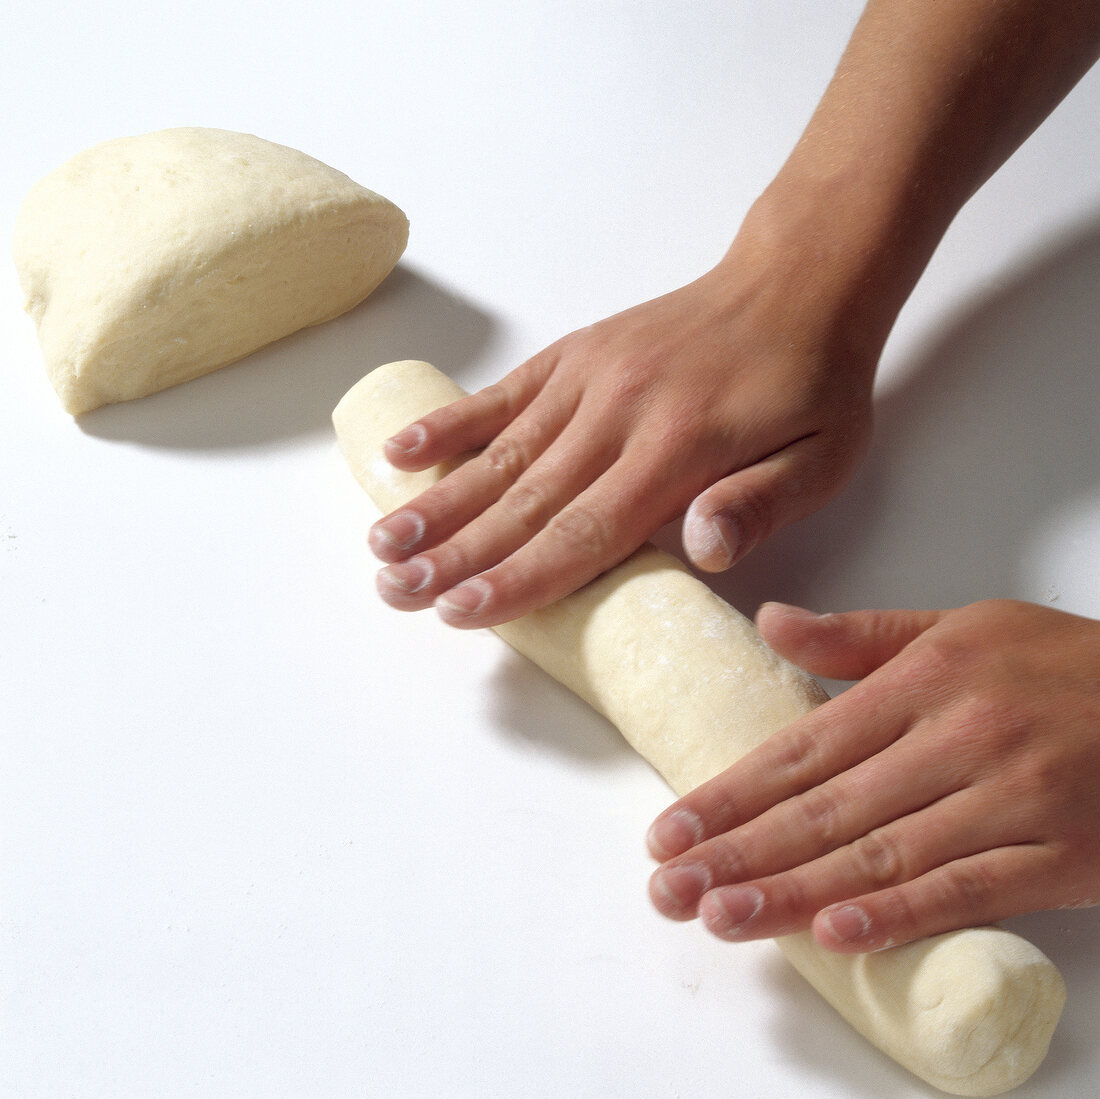 Rolls being made from dough while preparing pasta, step 8